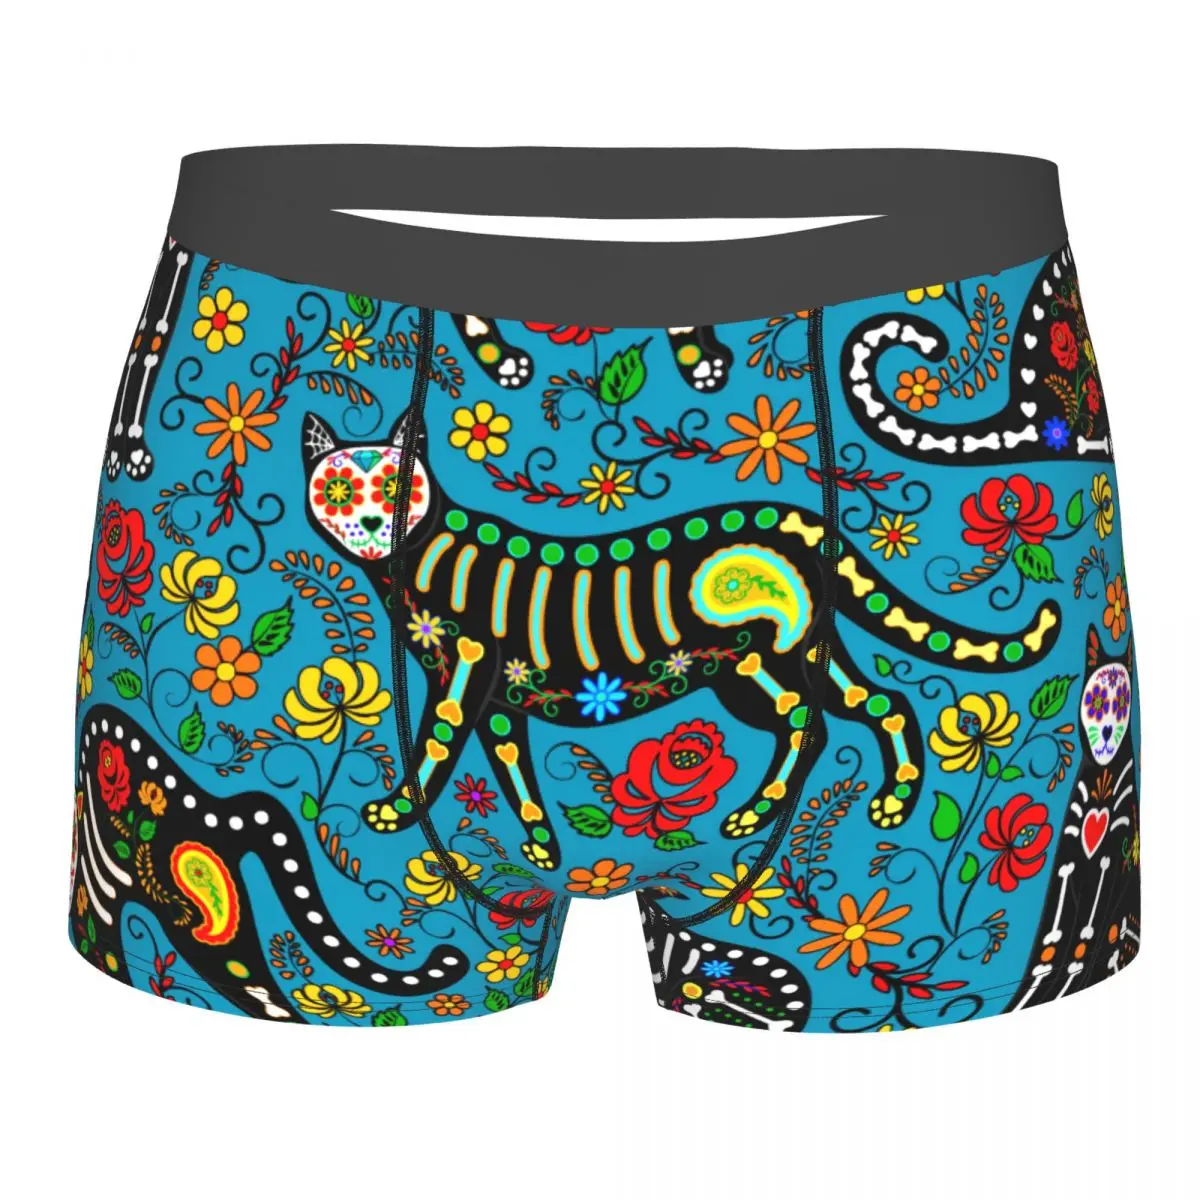 Boxershorts Men Comforable Panties Set Calavera Sugar Skull Black Cats In Mexican Style The Day Of The Dead Underwear Man Boxer